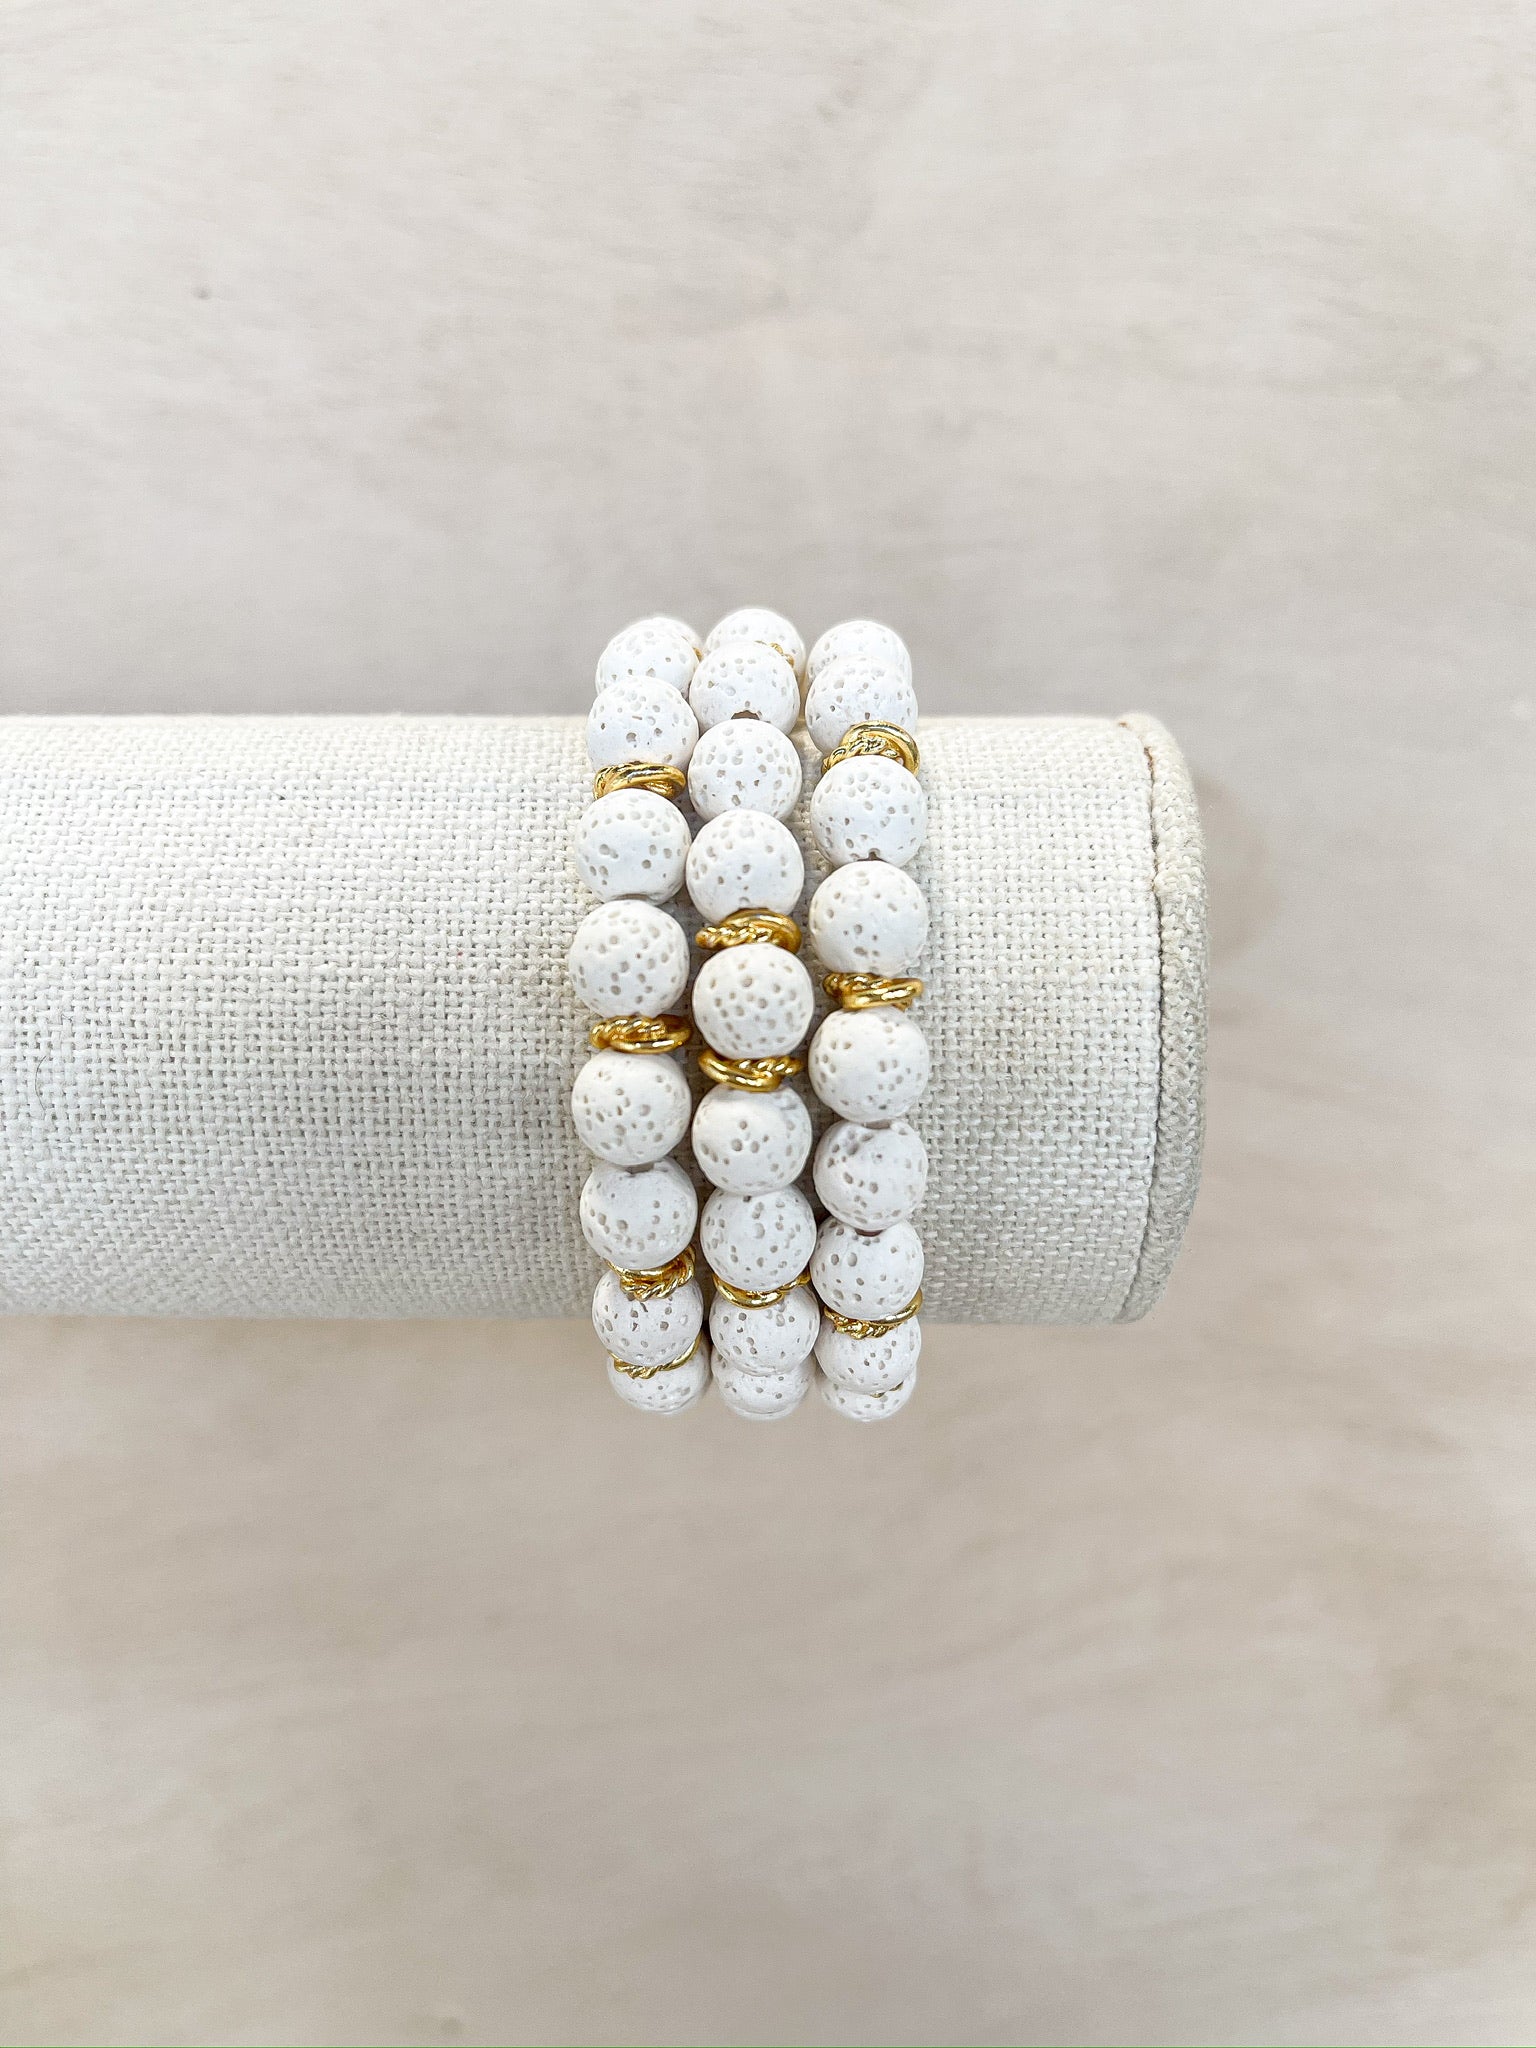 White coral beads, separated, with chunky gold beads, handmade